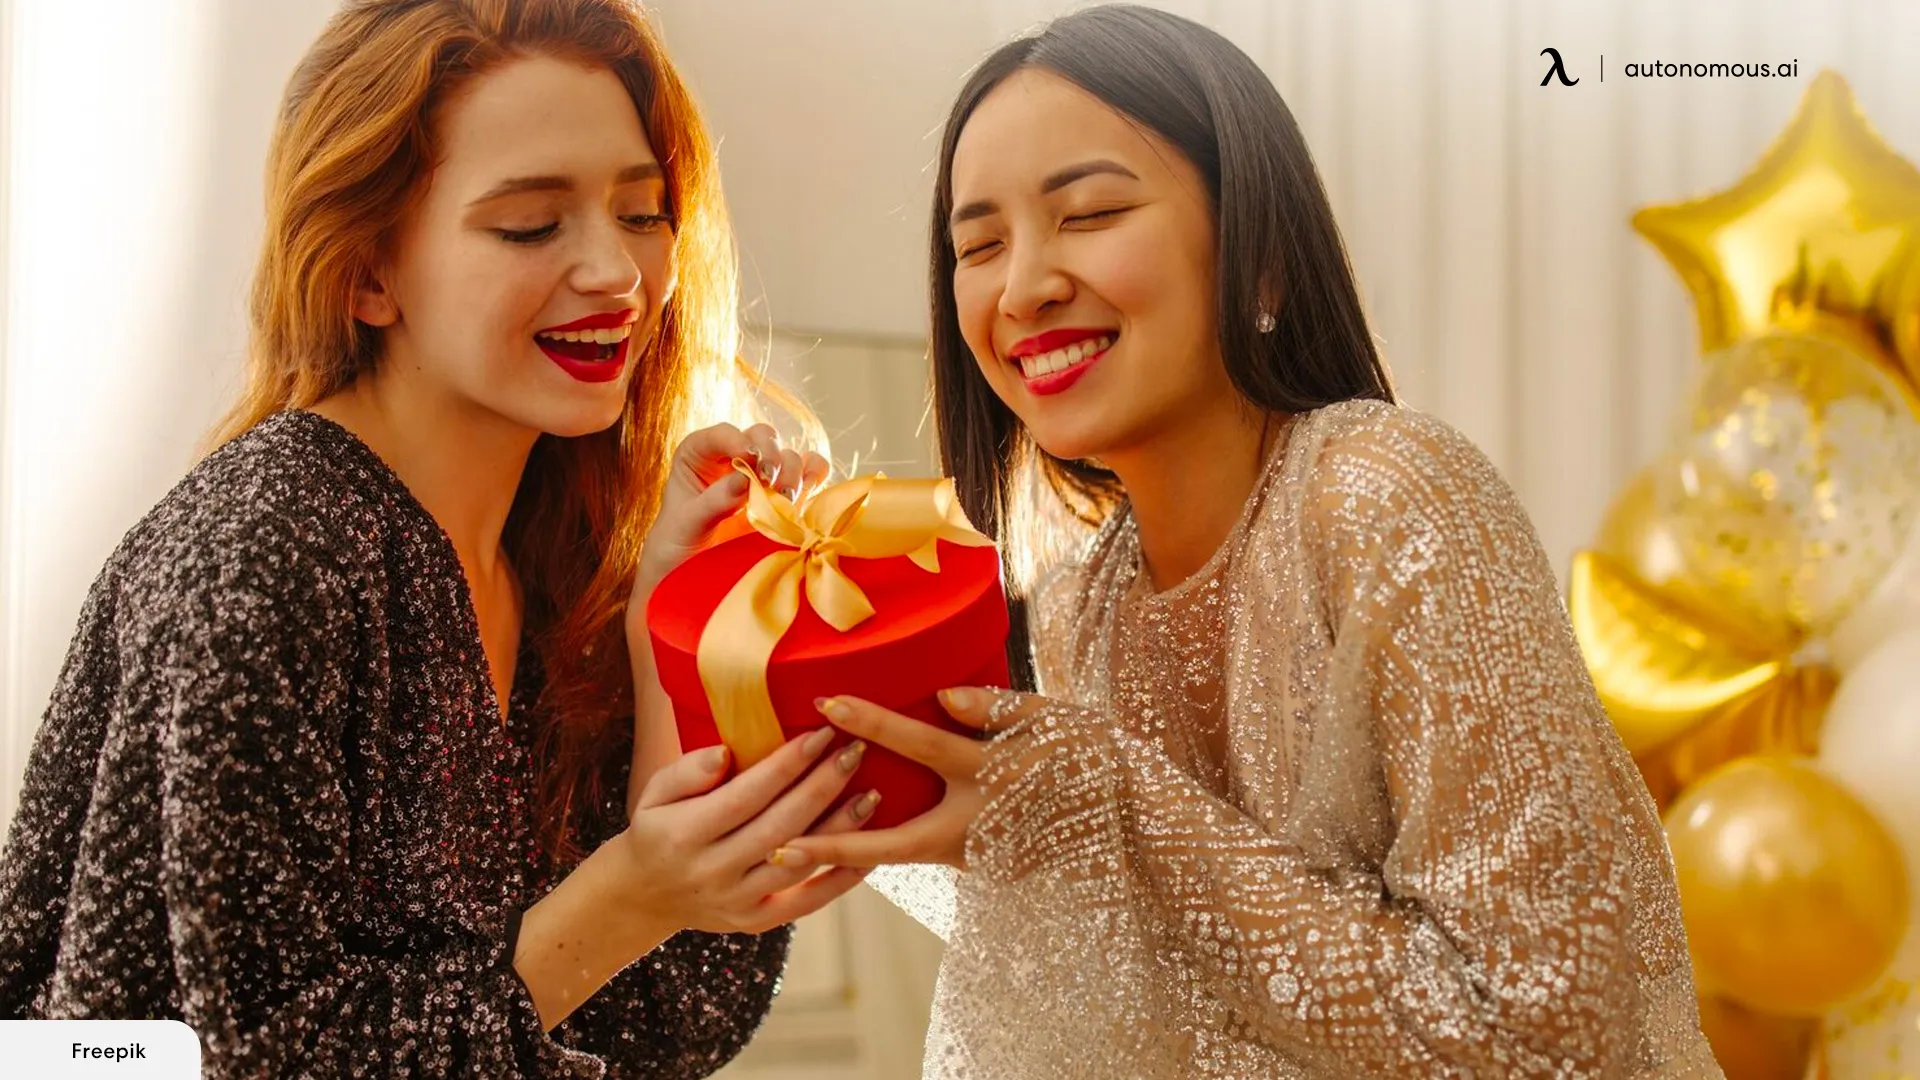 Are there eco-friendly options among these New Year gifts for best friends